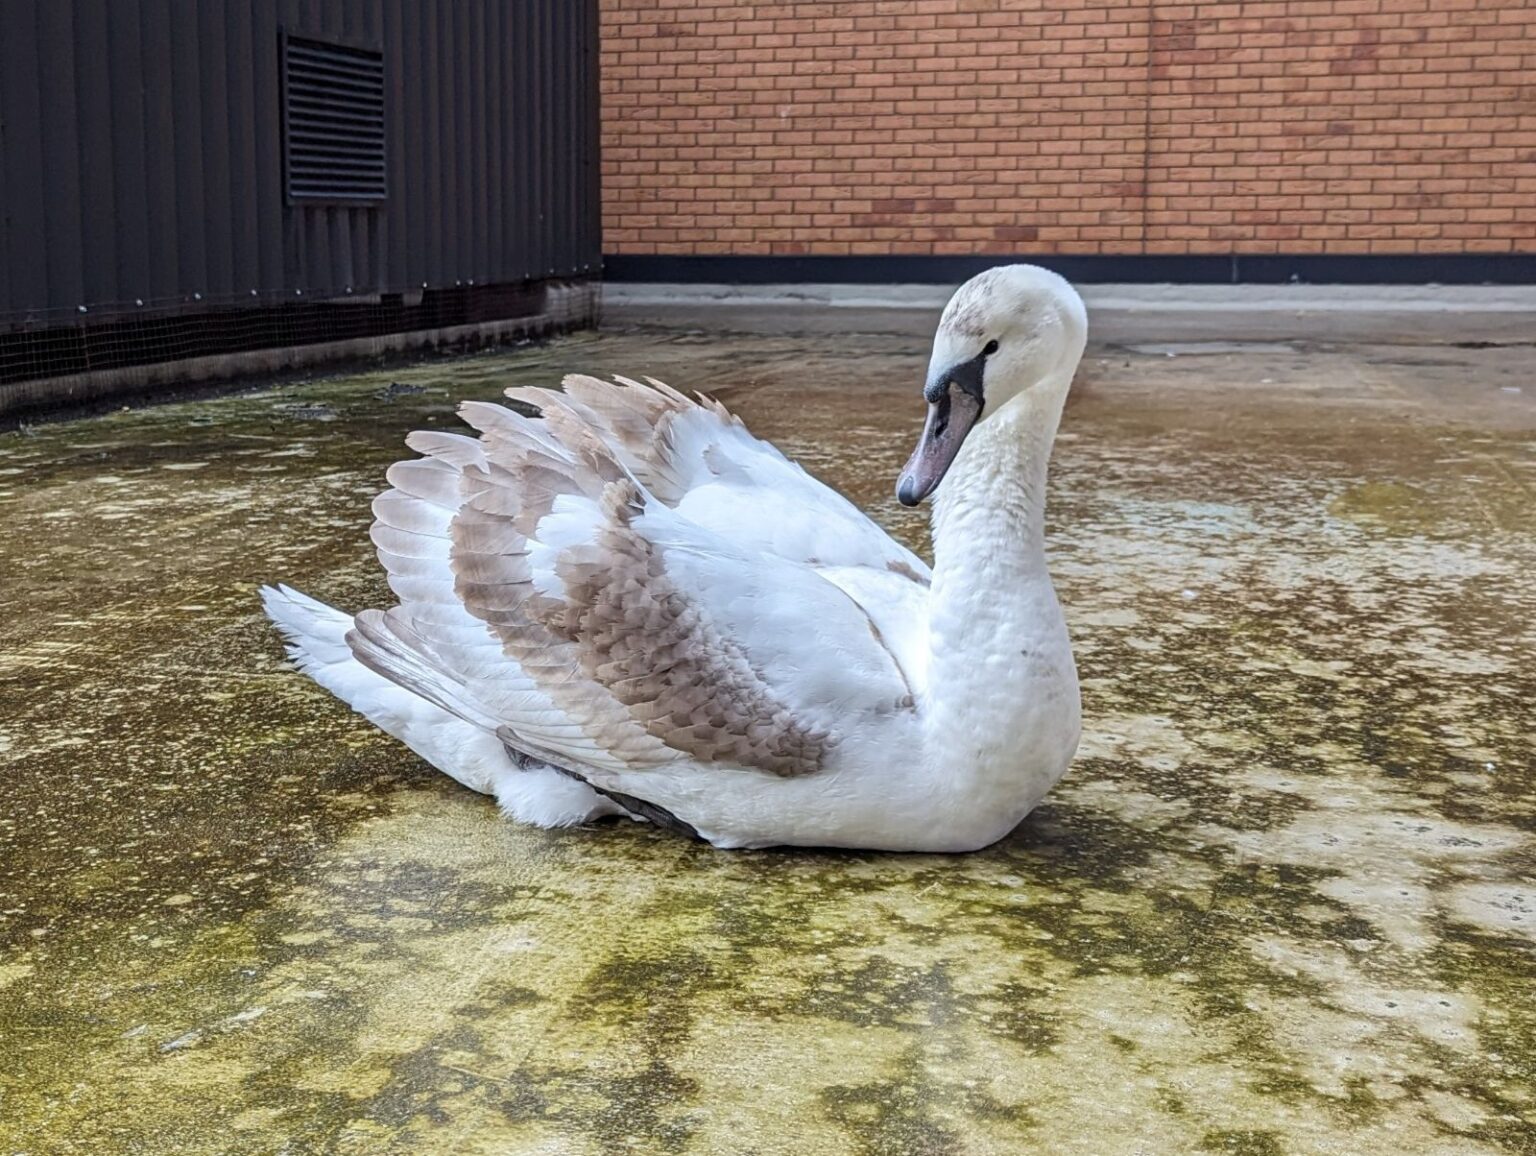 A feisty swan crash-landed on a car park roof, trapped overnight. Rescued by RSPCA, released into River Tees. Unusual but heartwarming tale.